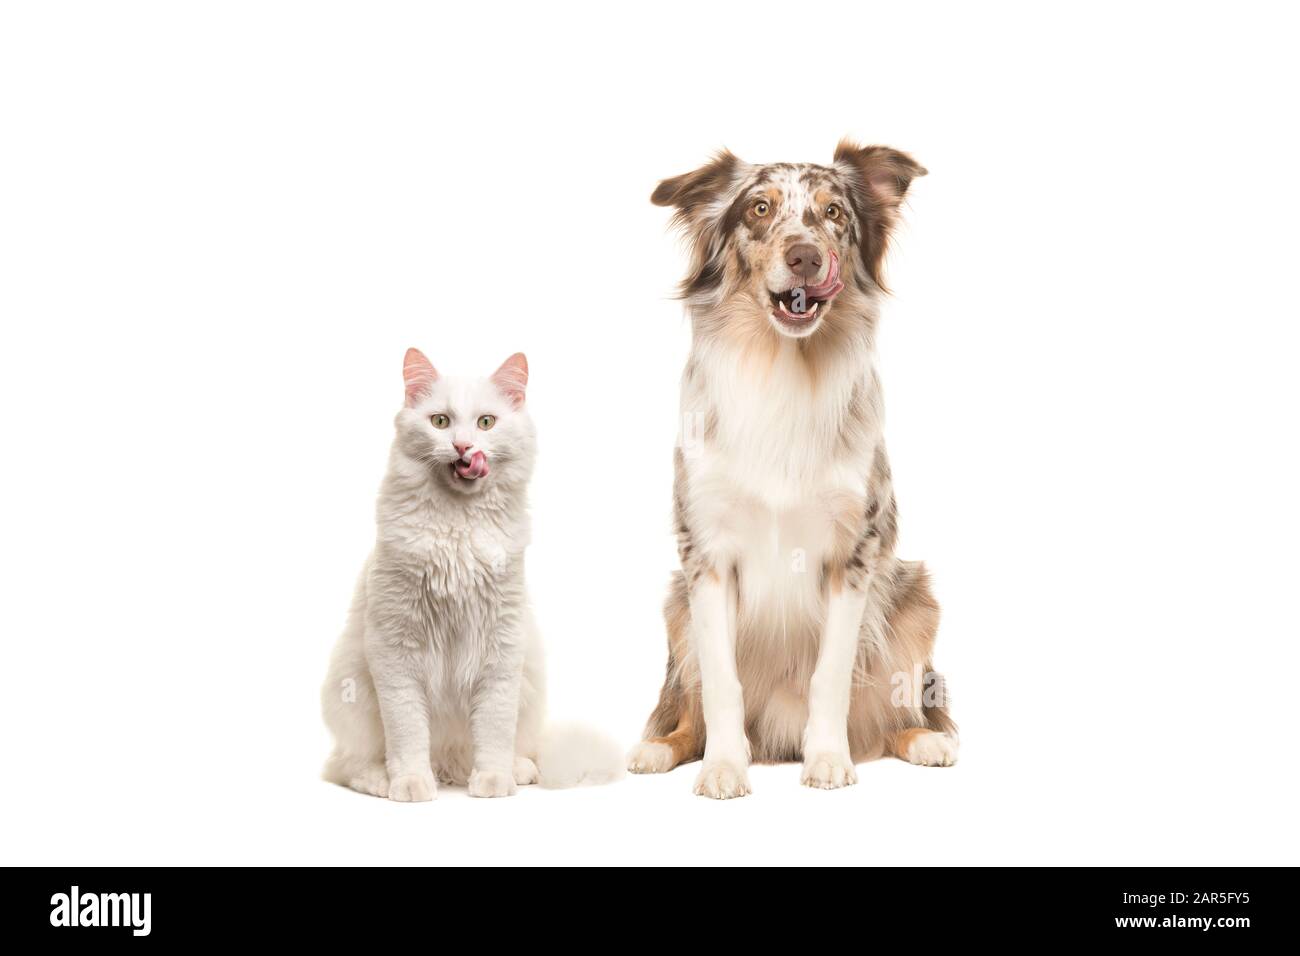 Australian shepherd dog and white longhaired cat looking at the camera licking their lips begging for food isolated on a white background Stock Photo